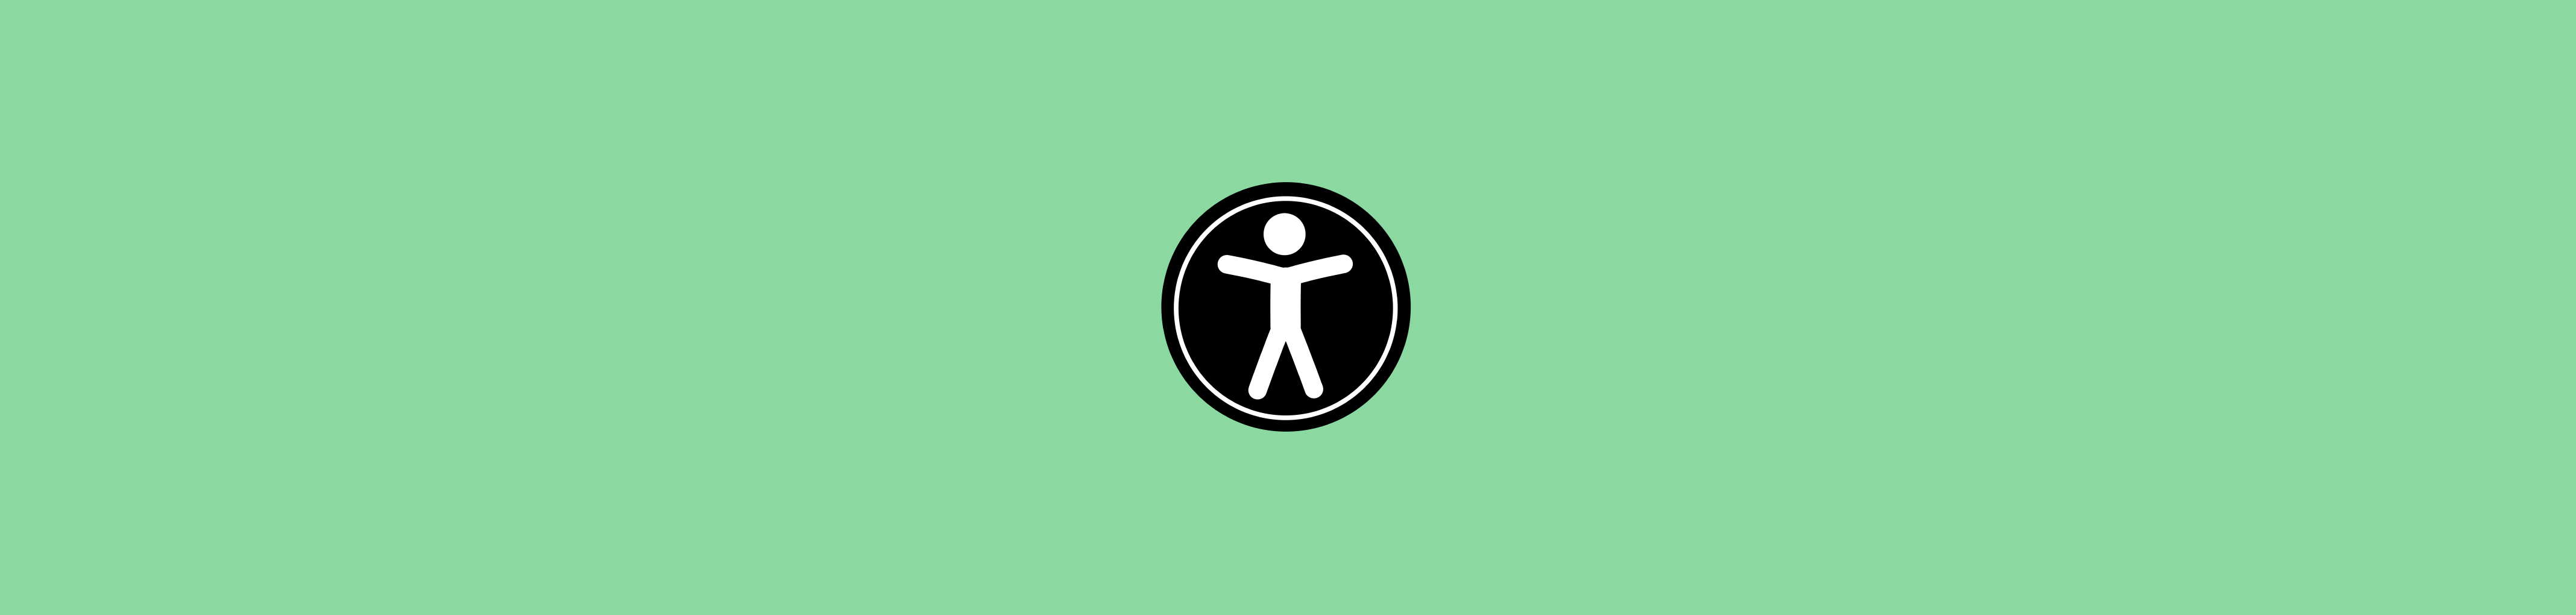 A white stick figure in a black circle representing the accessibility icon over a light green background